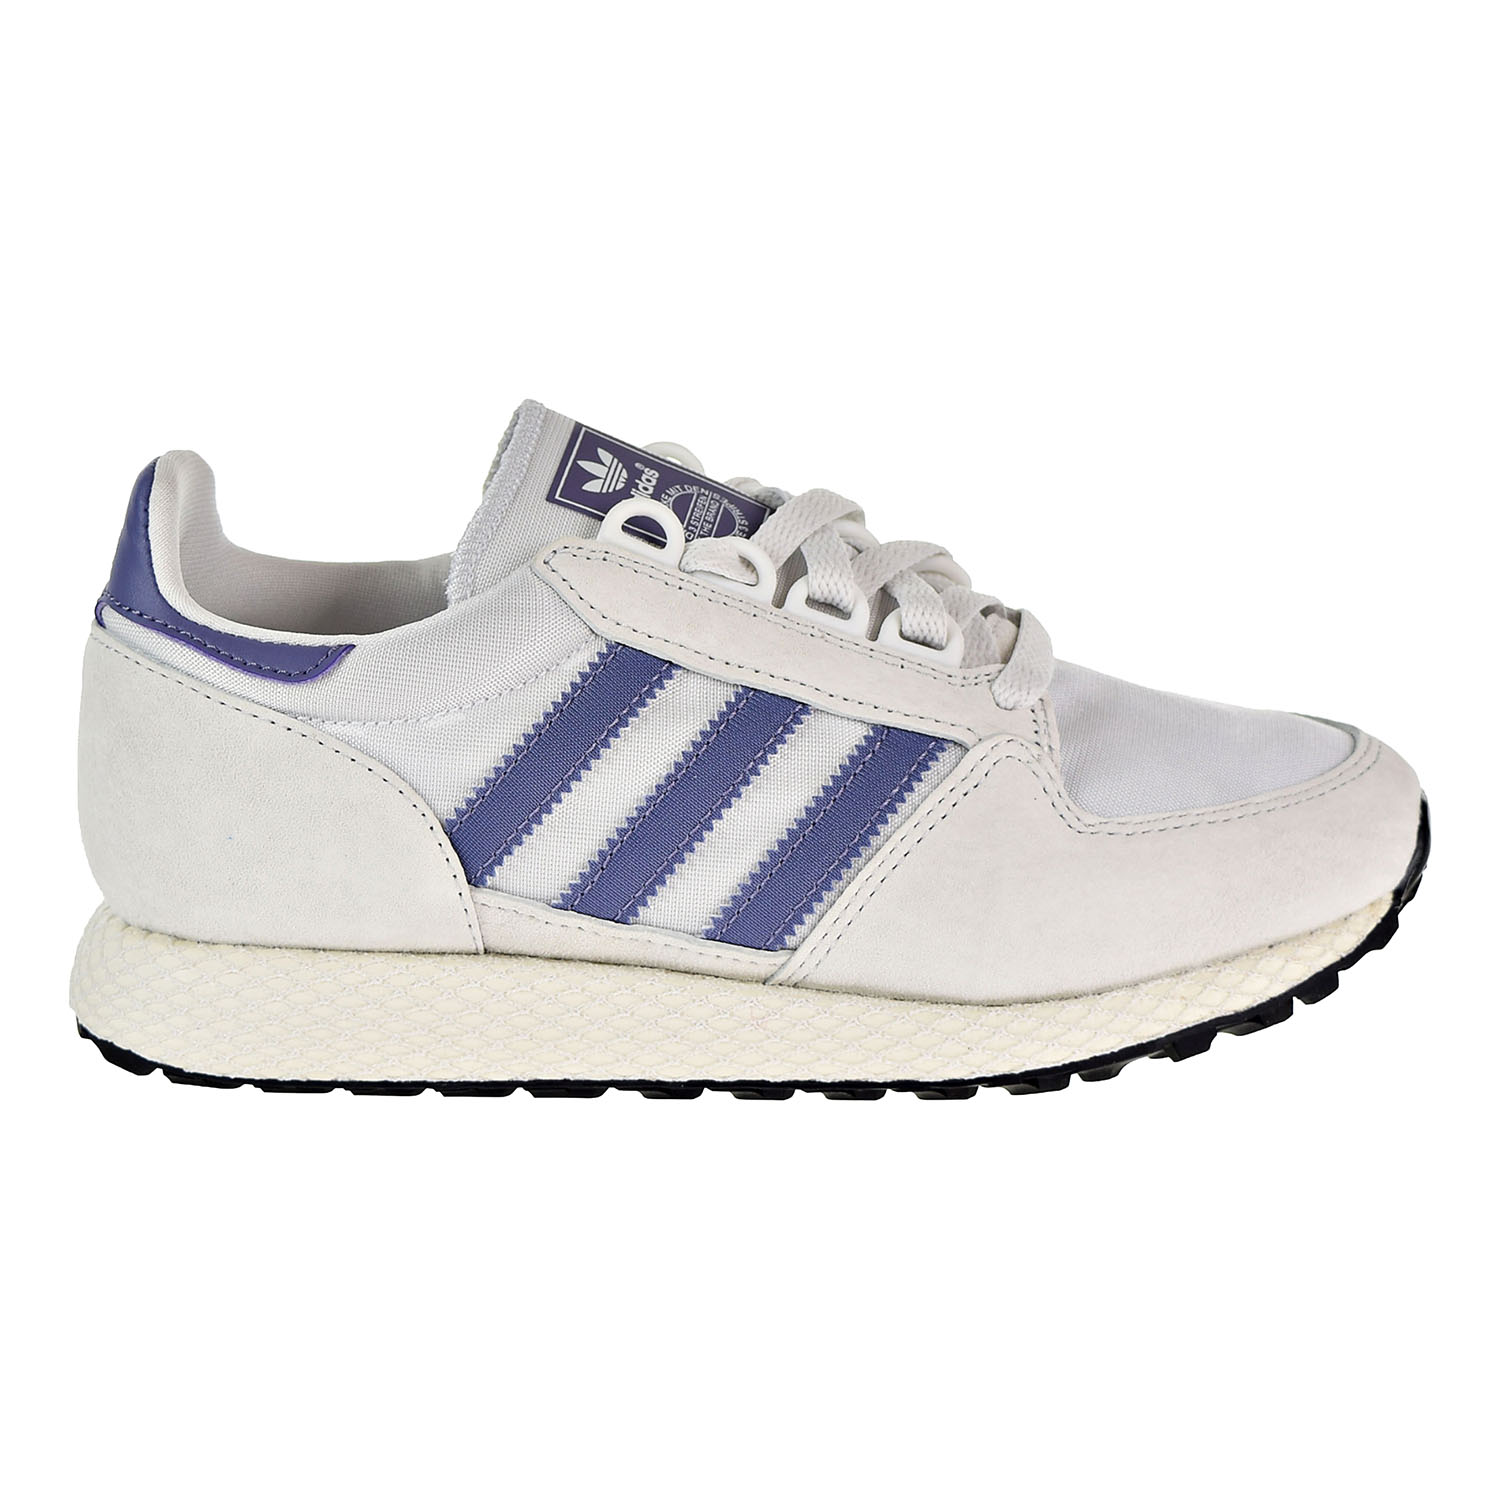 adidas Women's forest groveadidas Women's forest grove low-top sneakers